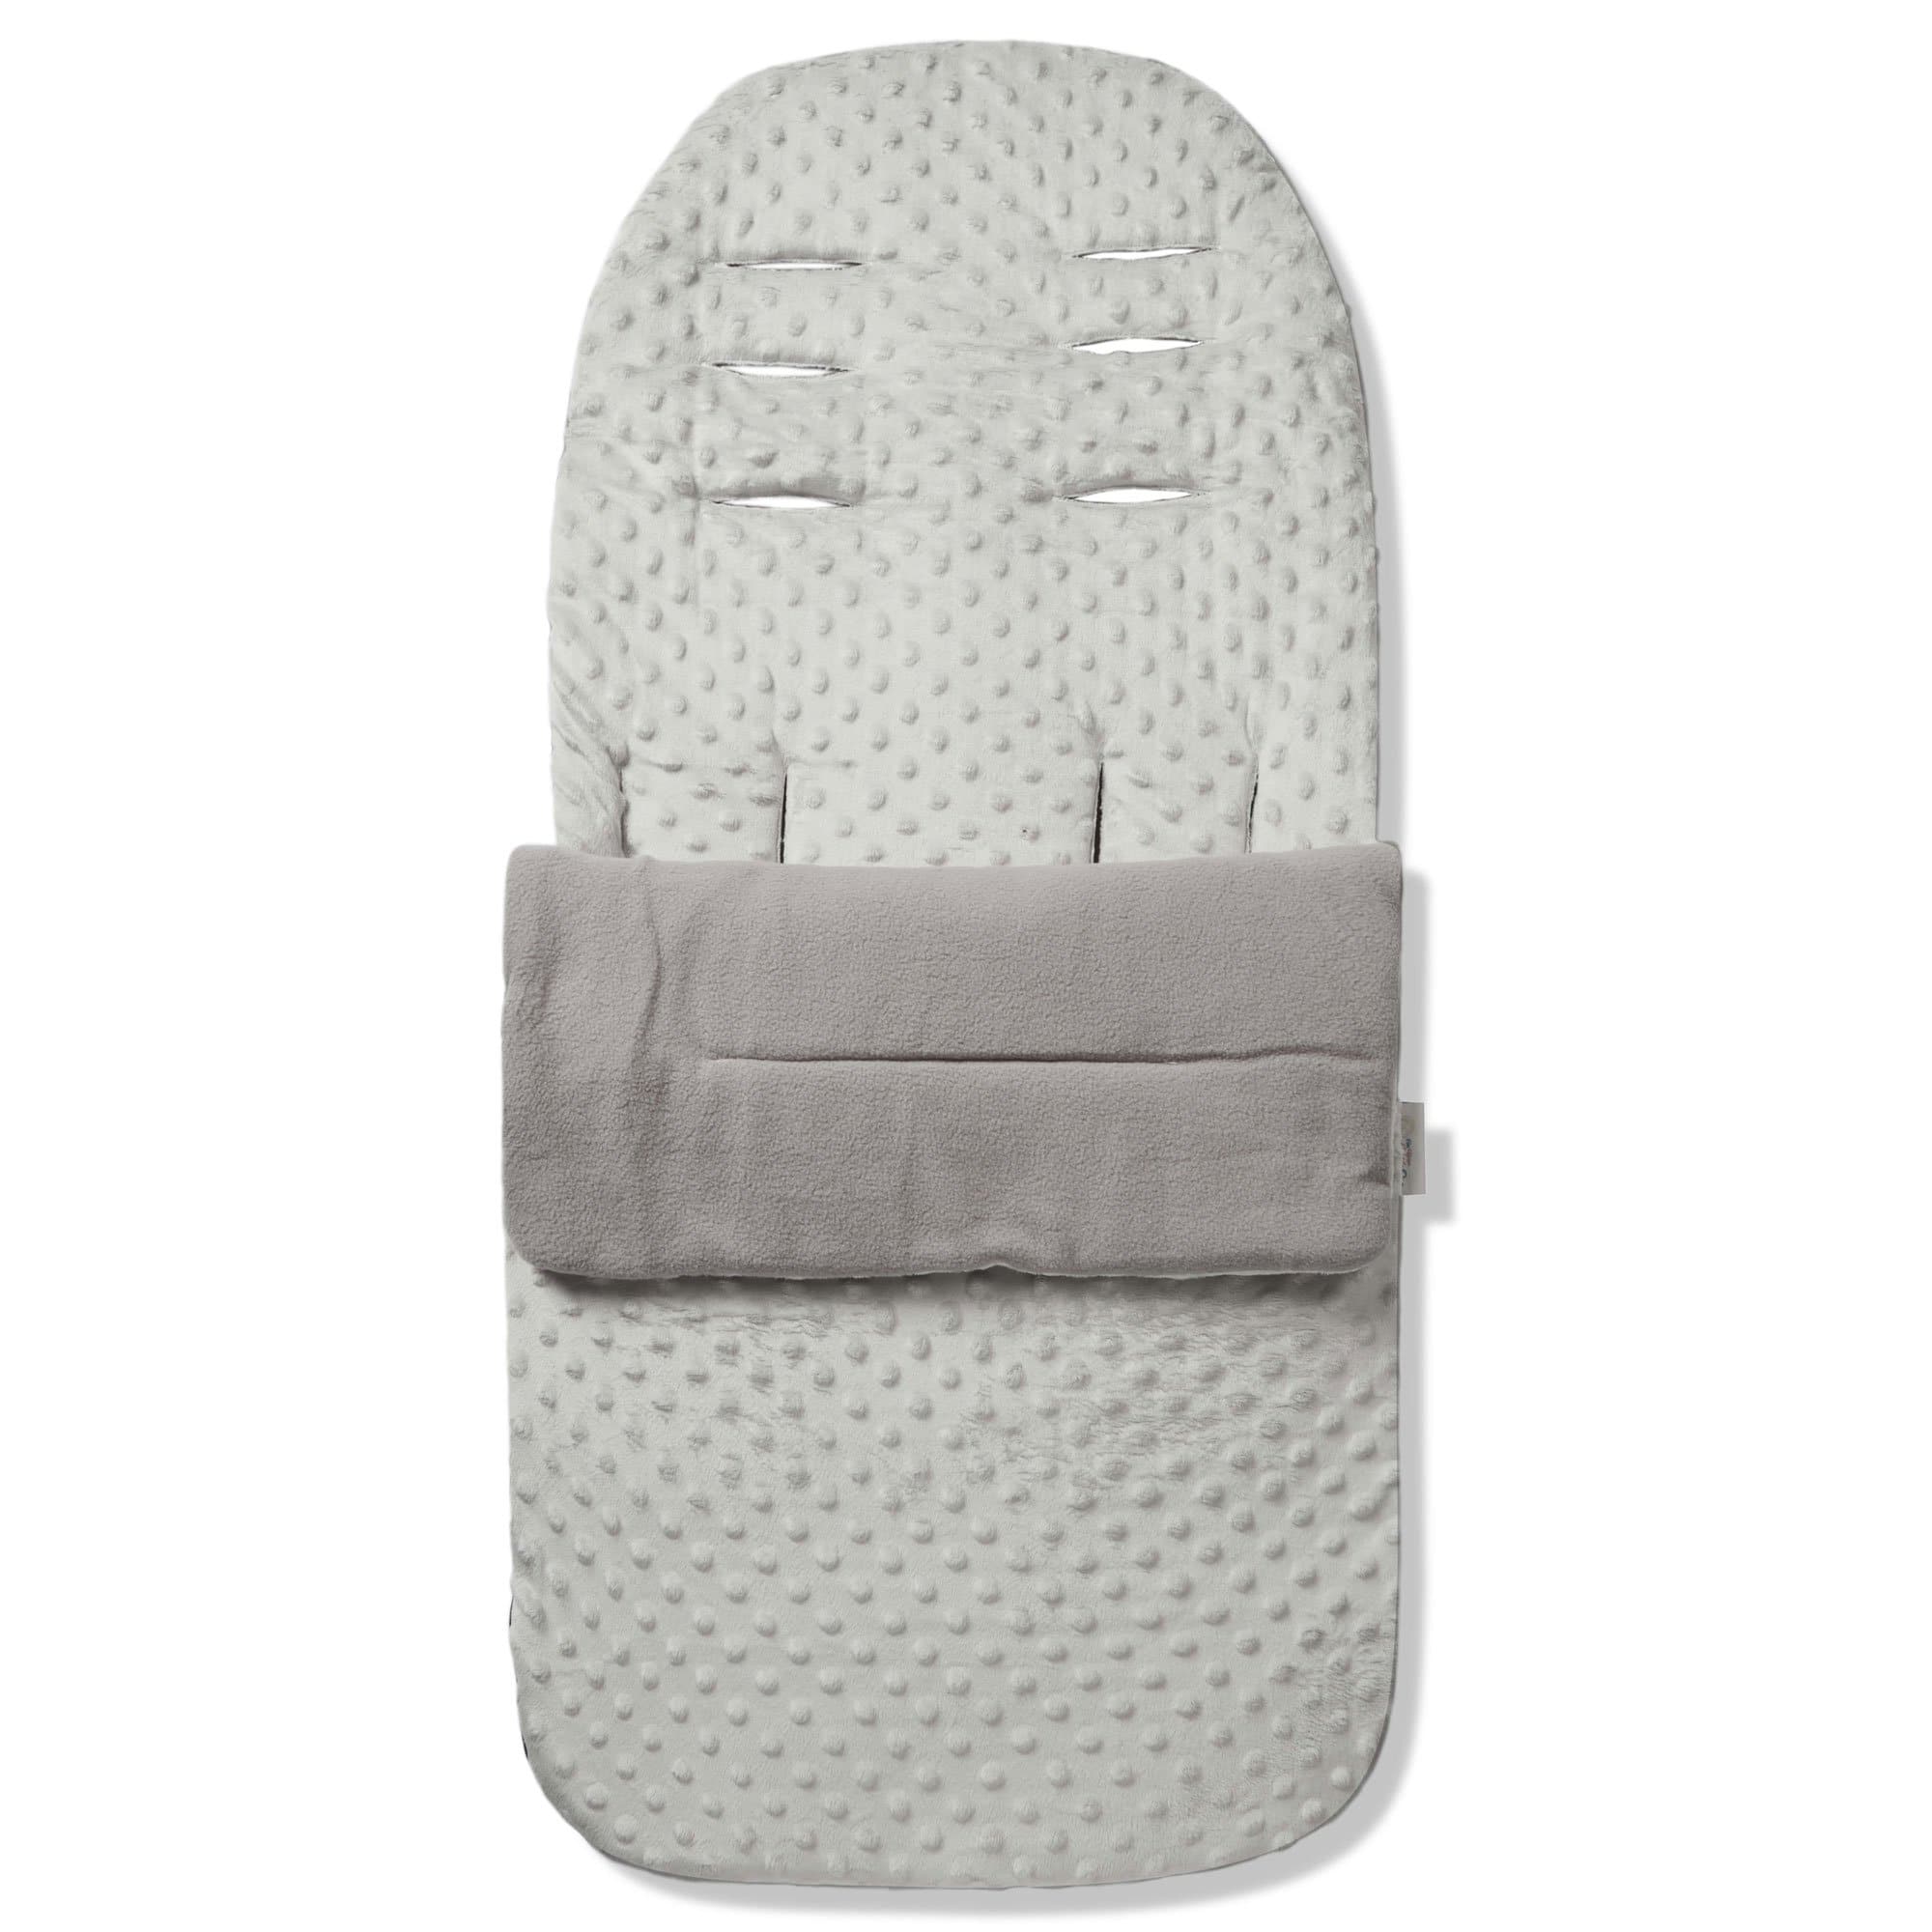 Dimple Footmuff / Cosy Toes Compatible with Obaby - Grey / Fits All Models | For Your Little One